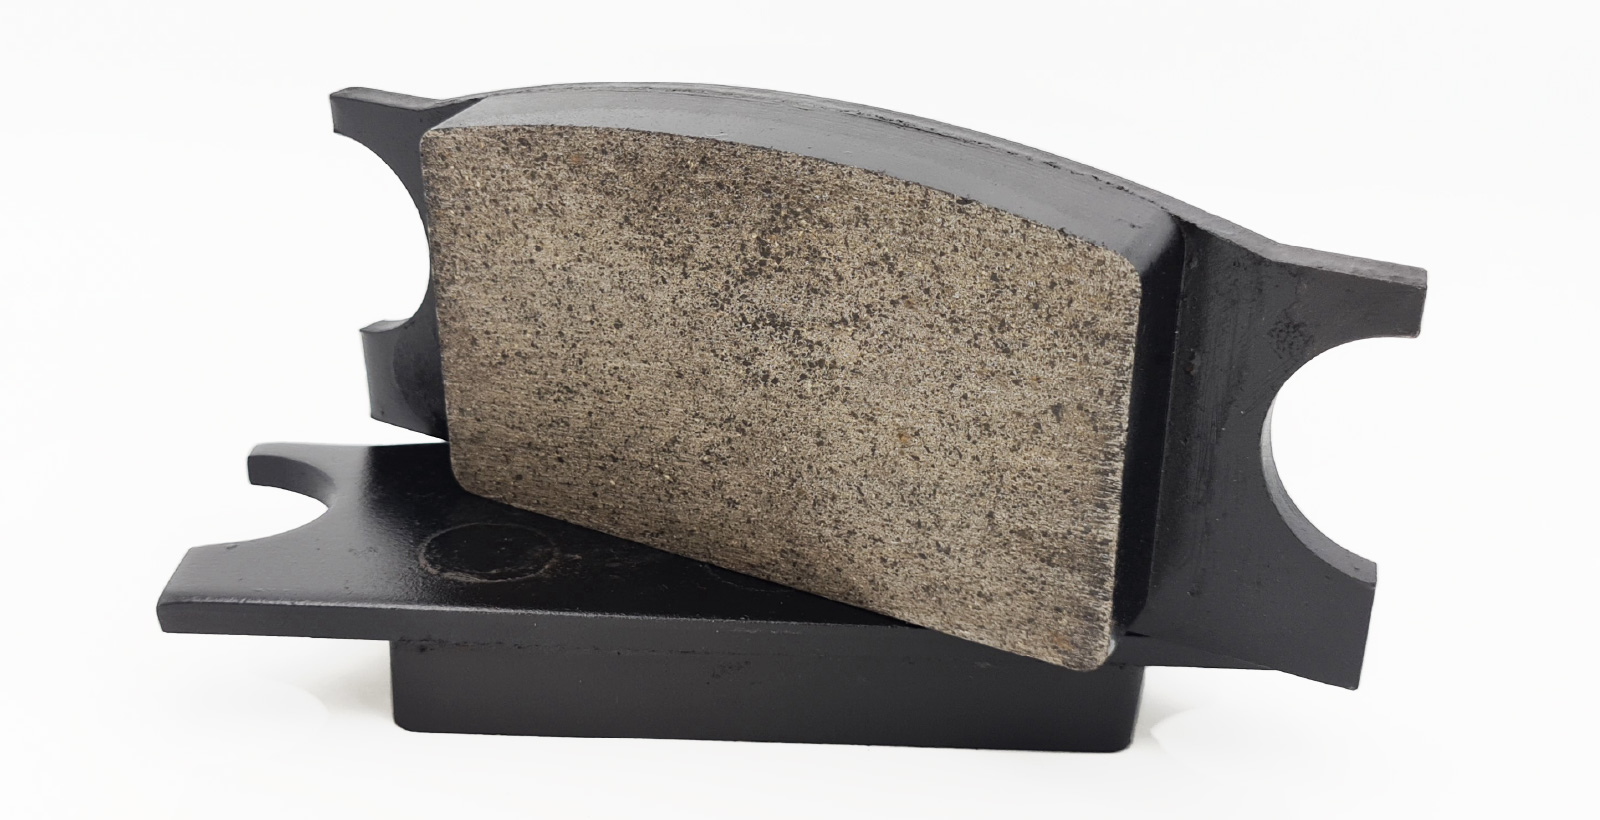 Commercial Brake Pads for Agricultural Industry